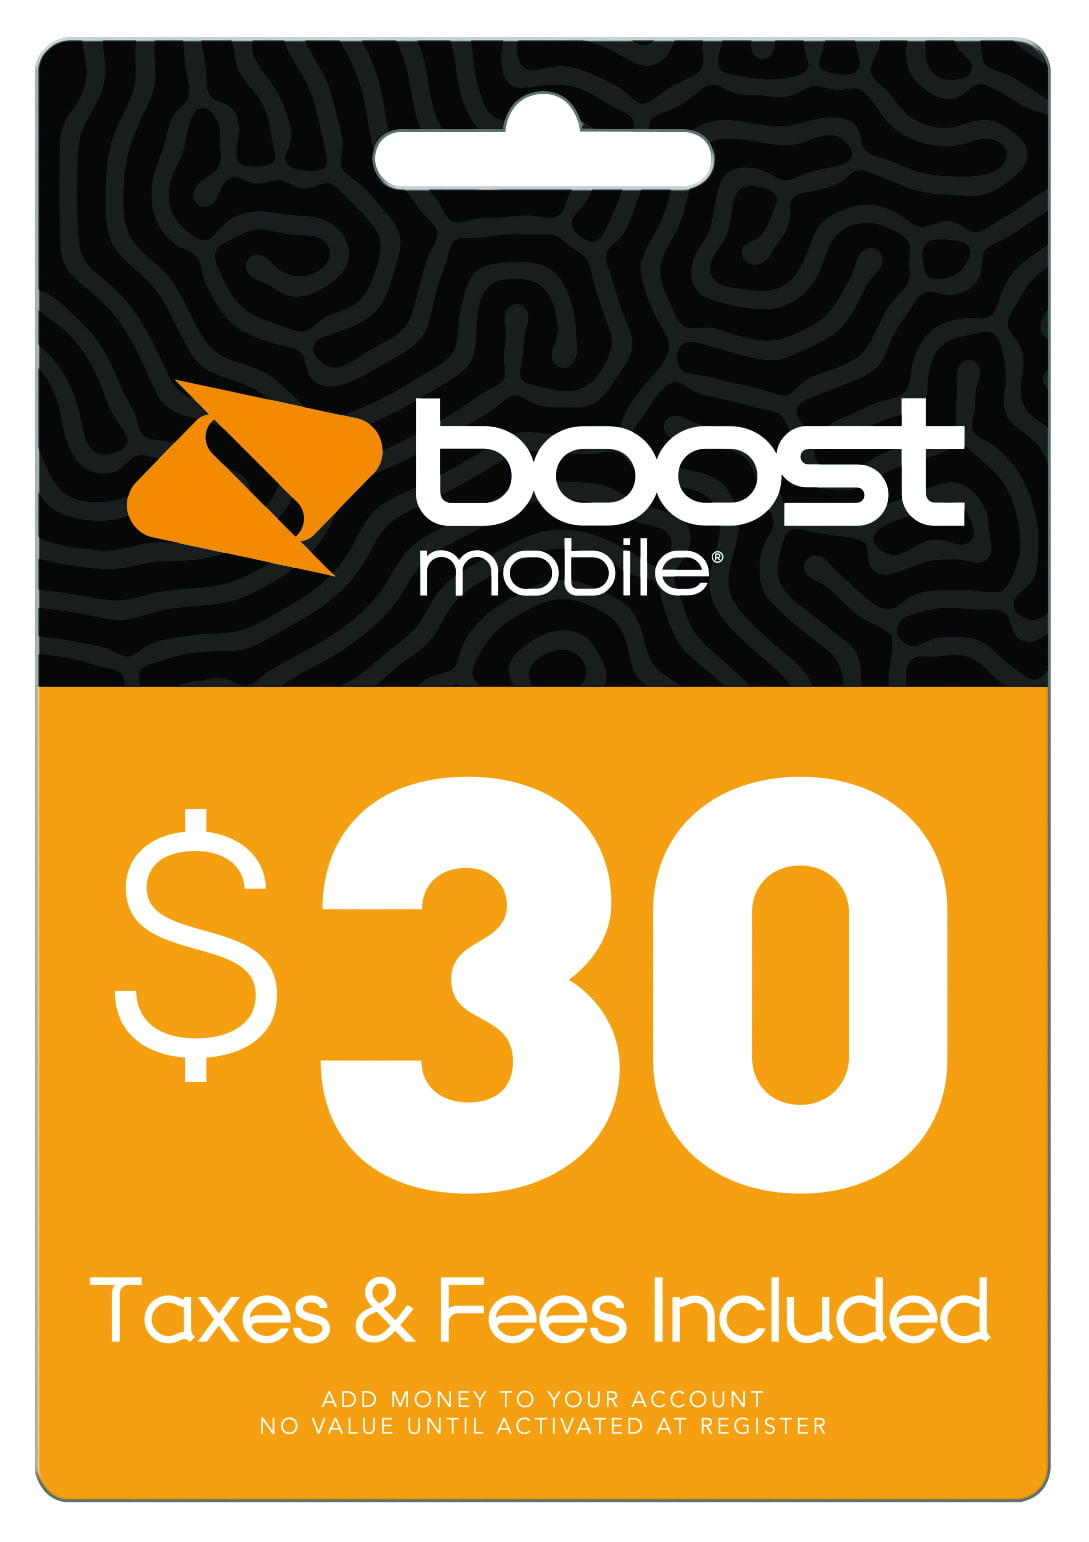 WILL BOOST MOBILE WORK WITH AT&T